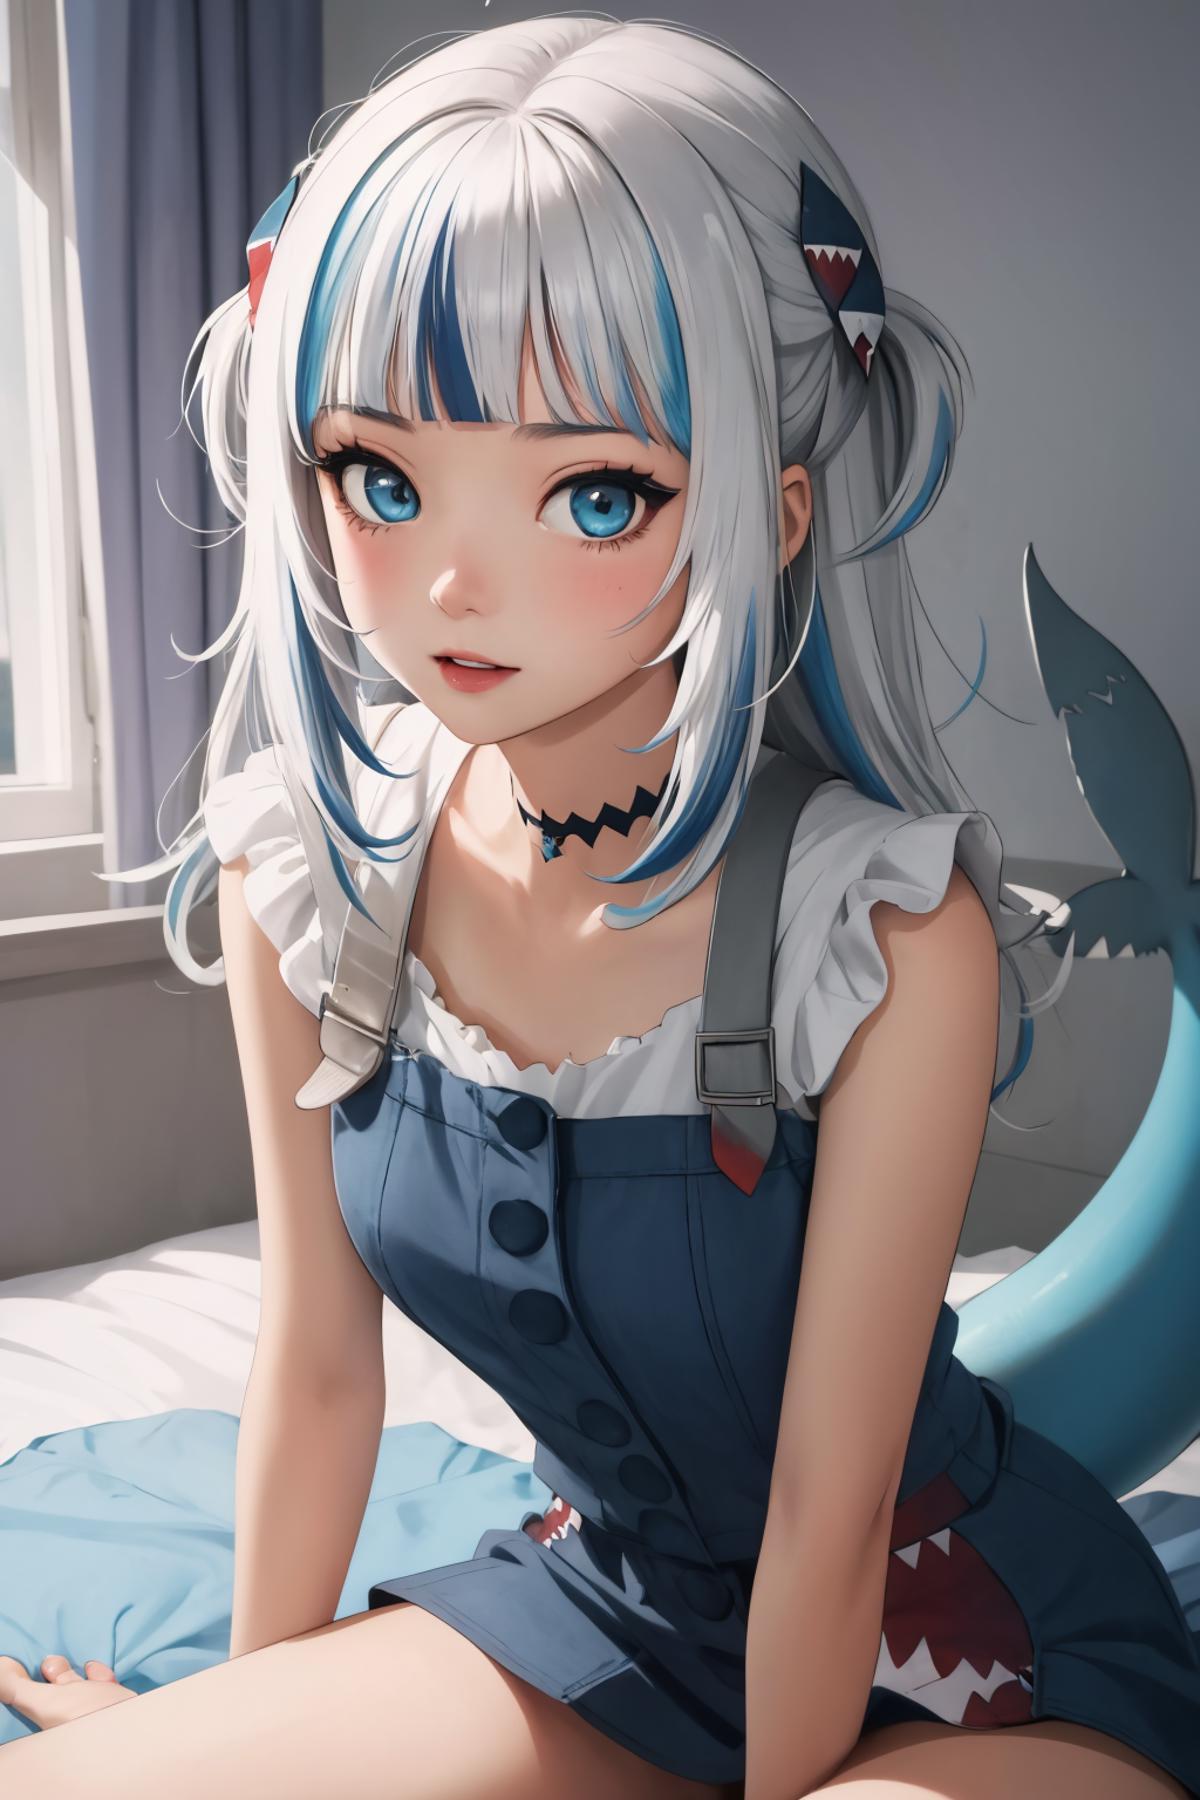 AI model image by Looker